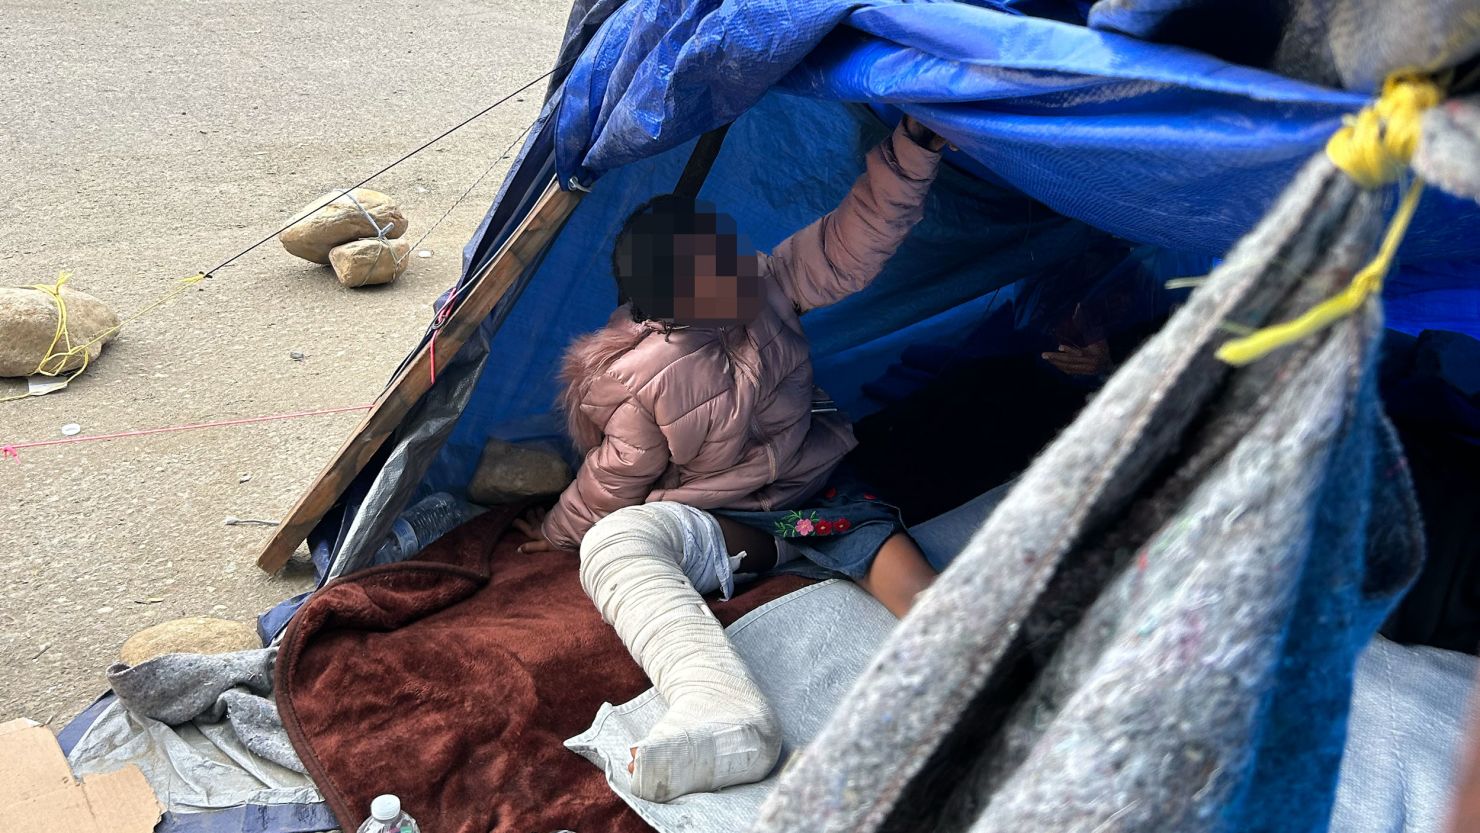 An aid worker said Border Patrol agents dropped off an 11-year-old girl in a leg cast at a border camp in California. A portion of this image has been obscured by CNN to protect a minor's identity.